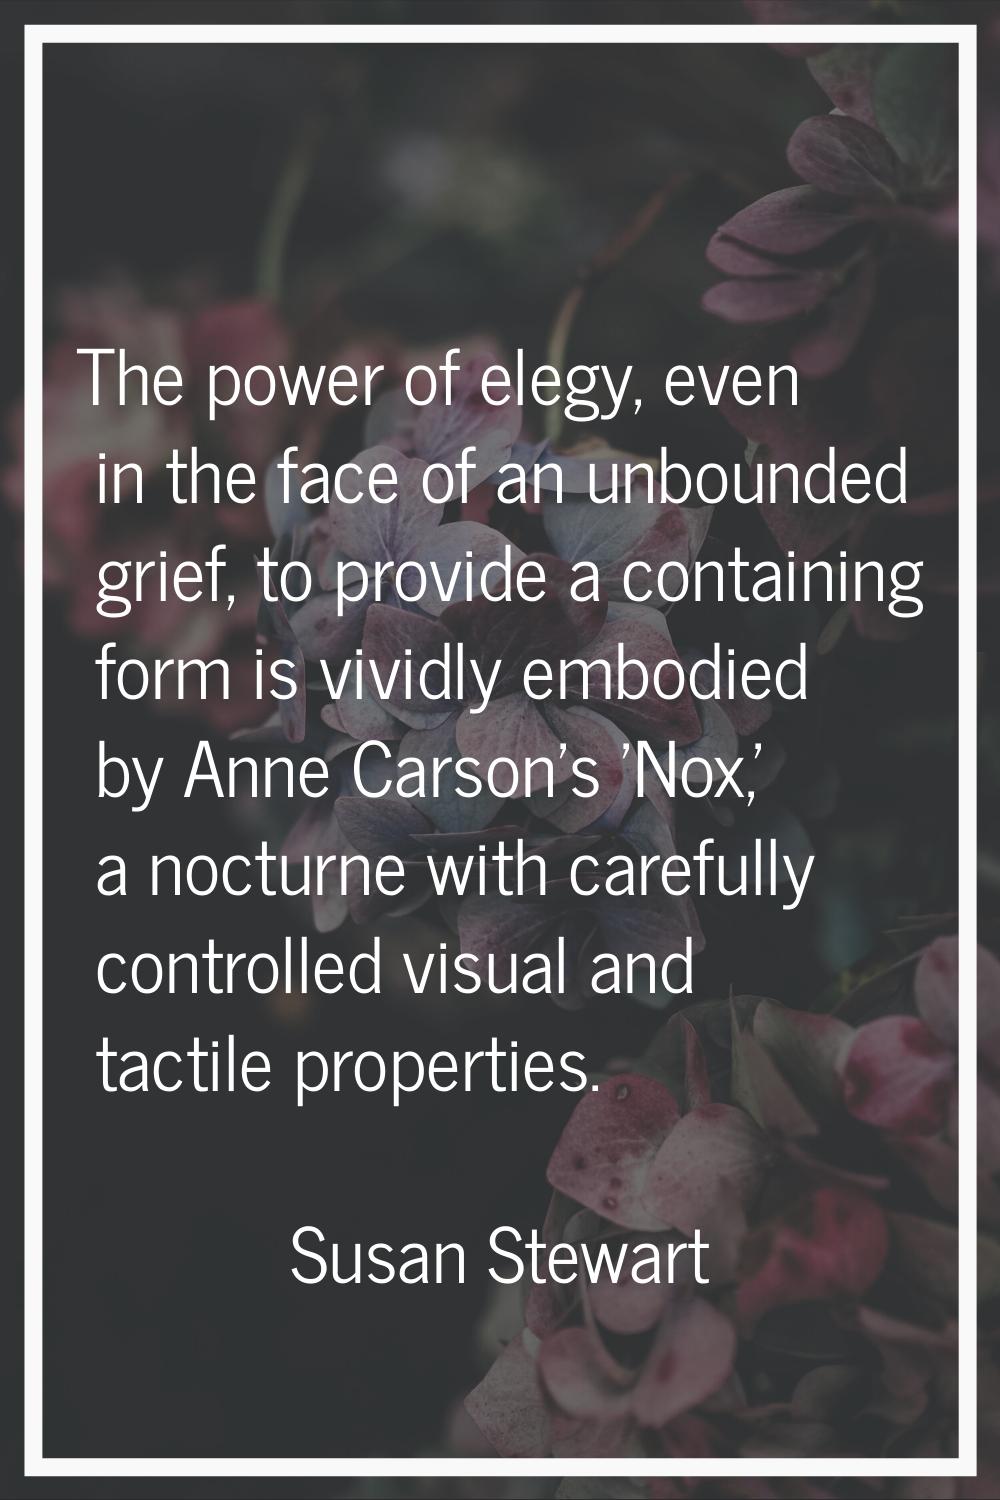 The power of elegy, even in the face of an unbounded grief, to provide a containing form is vividly